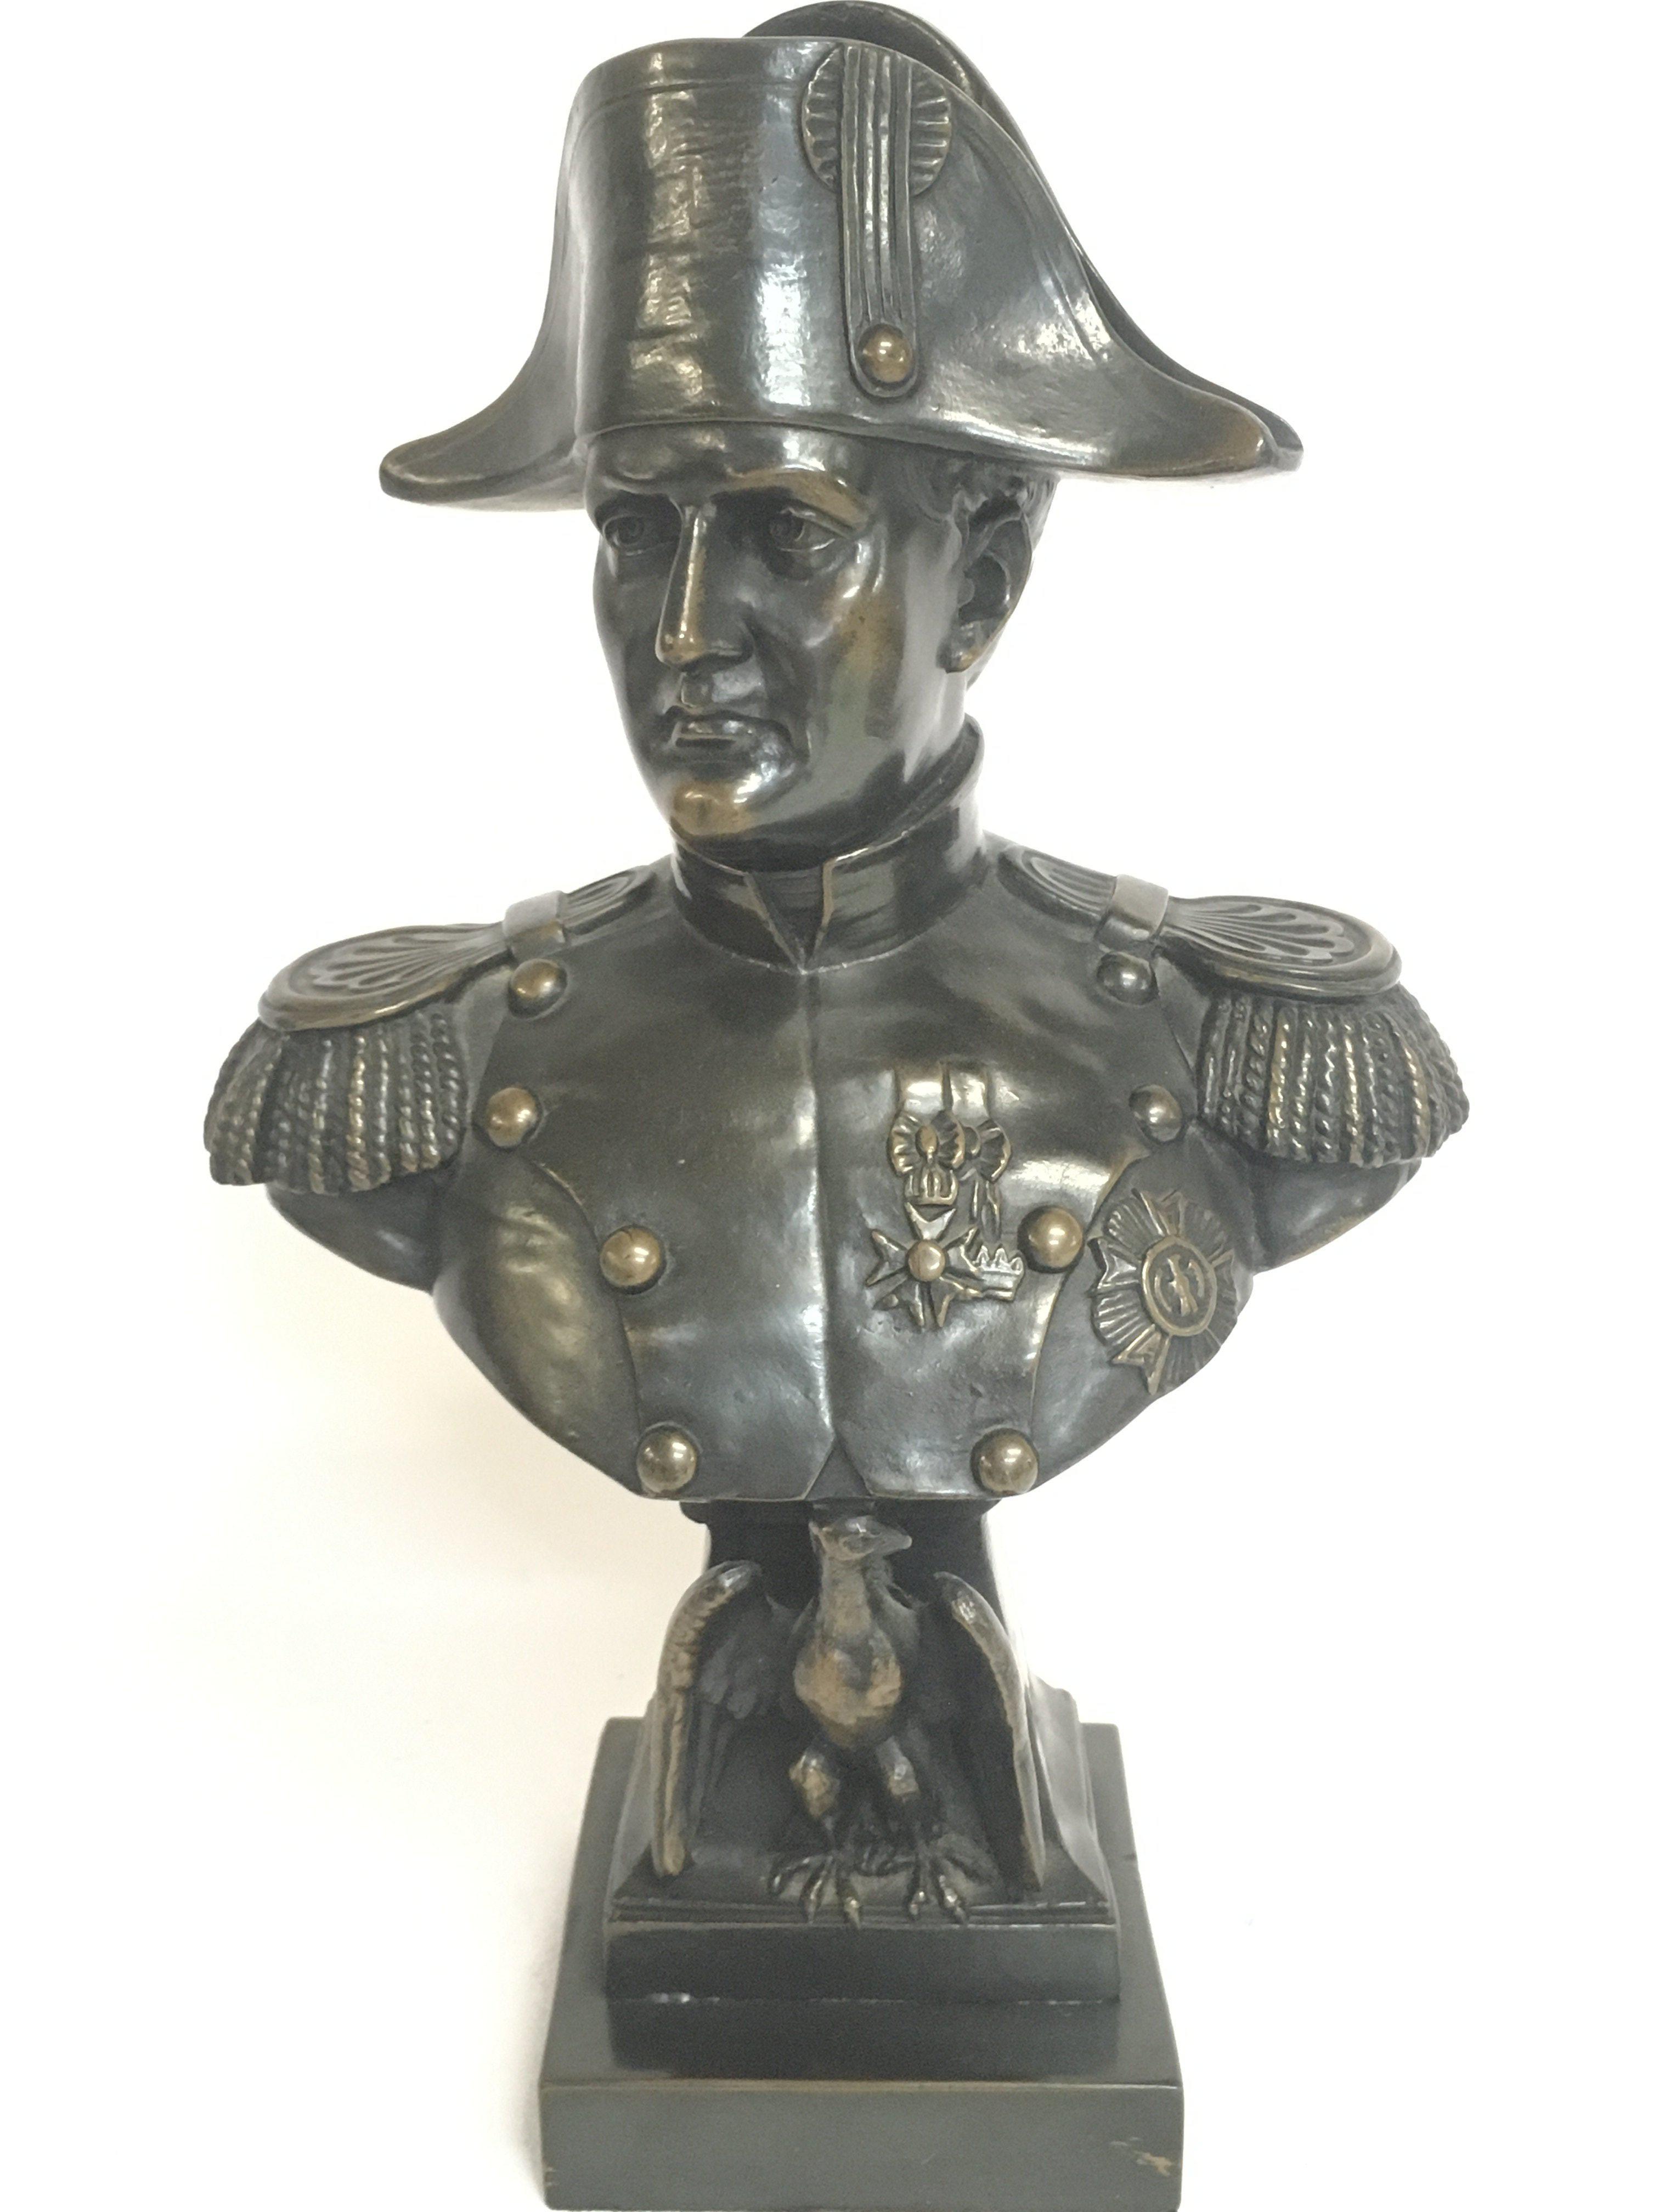 A French Napoleon metal covered resin bust by A. J